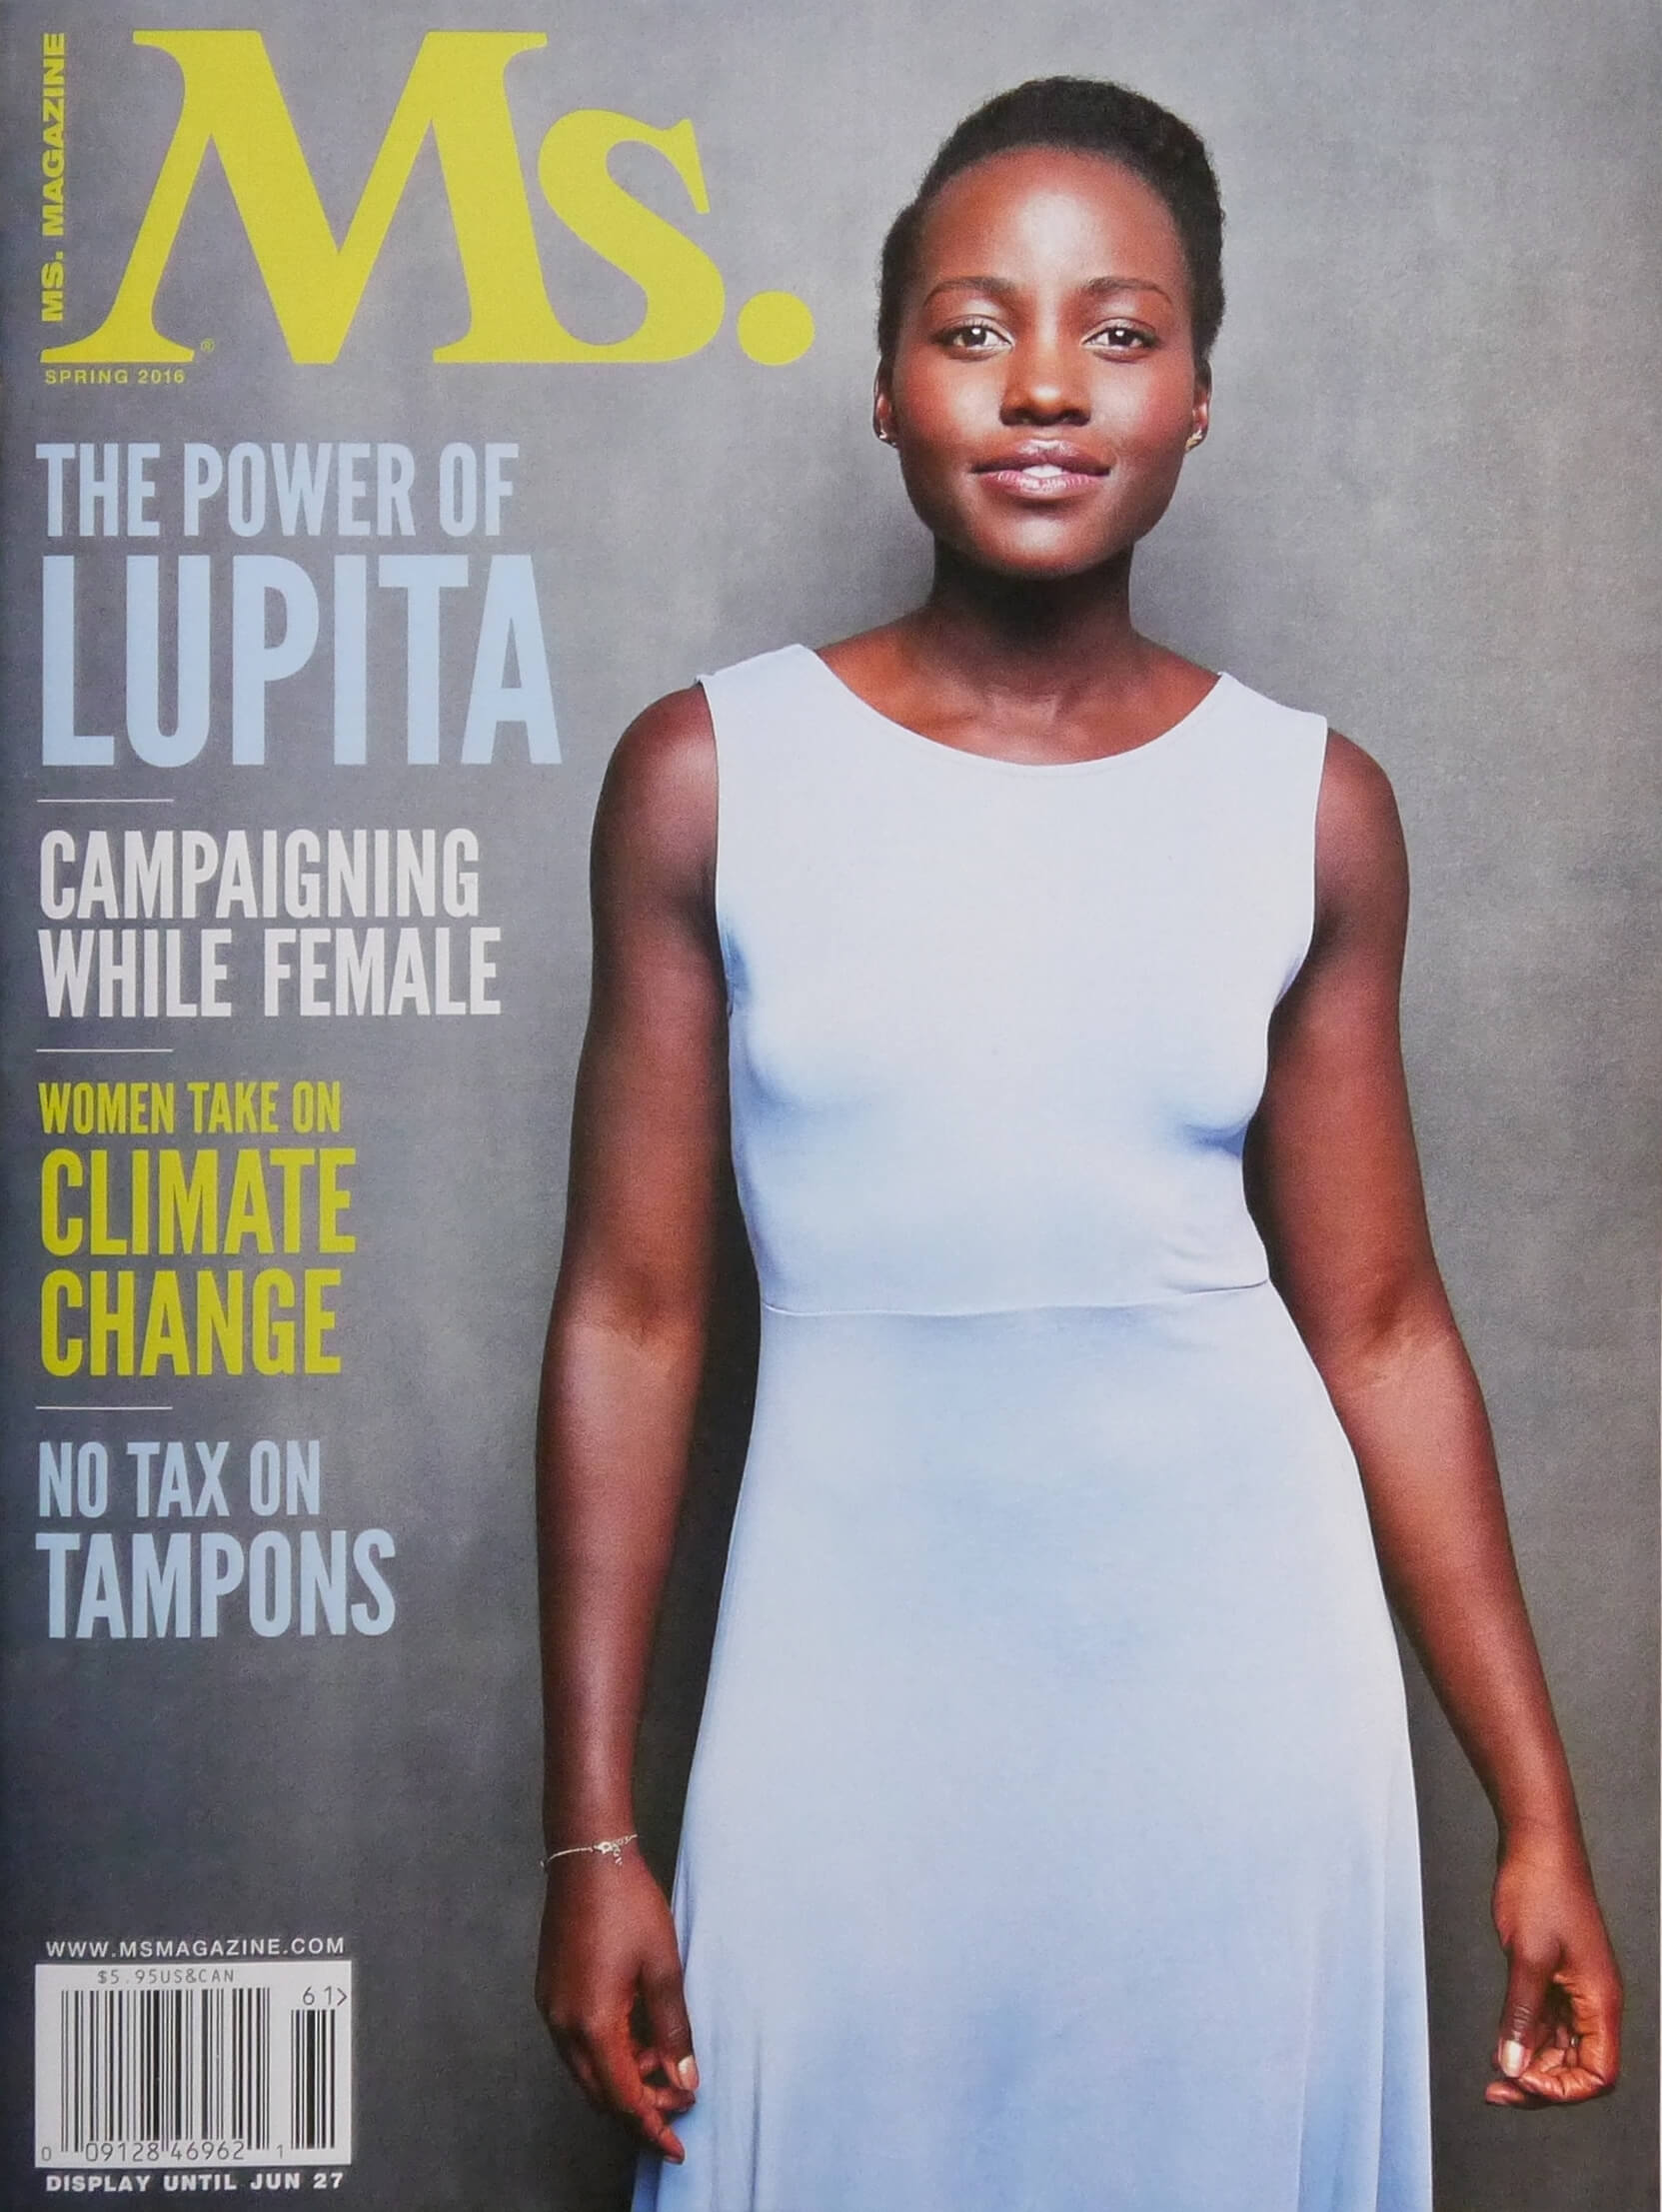 Lupita Nyong'o poses for the Spring 2016 cover of Ms. Magazine.